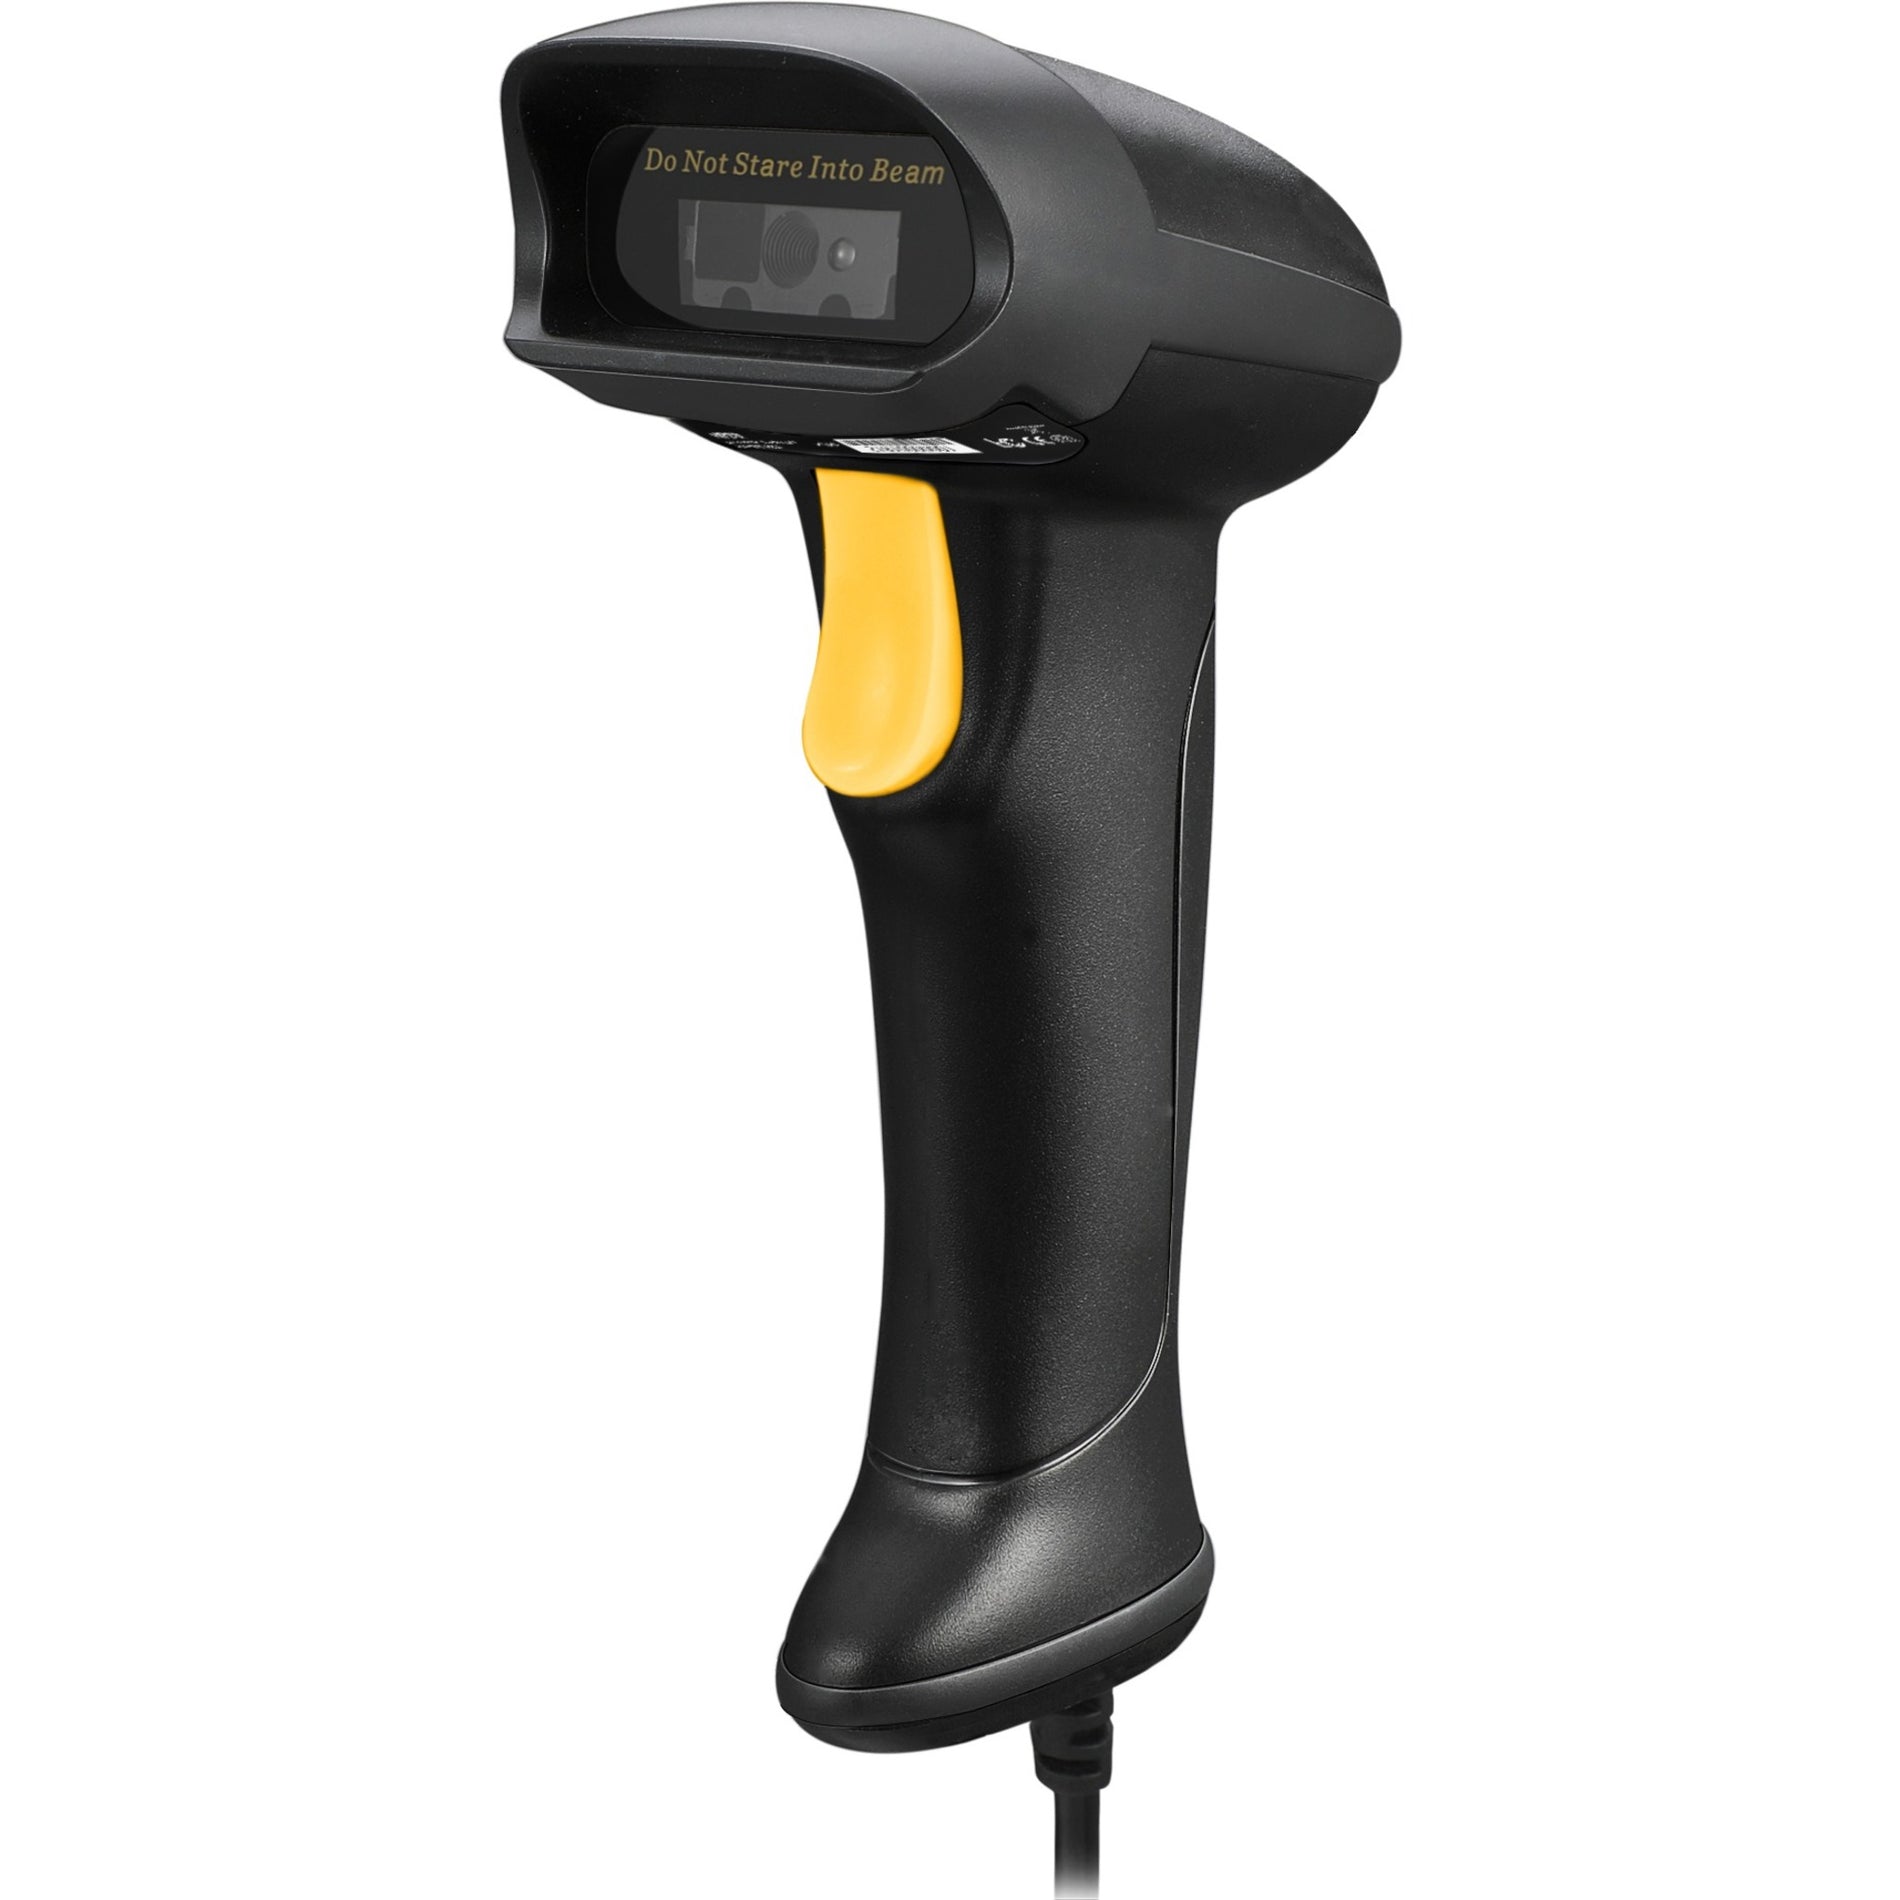 Adesso NUSCAN 2500TU Spill Resistant Antimicrobial 2D Barcode Scanner